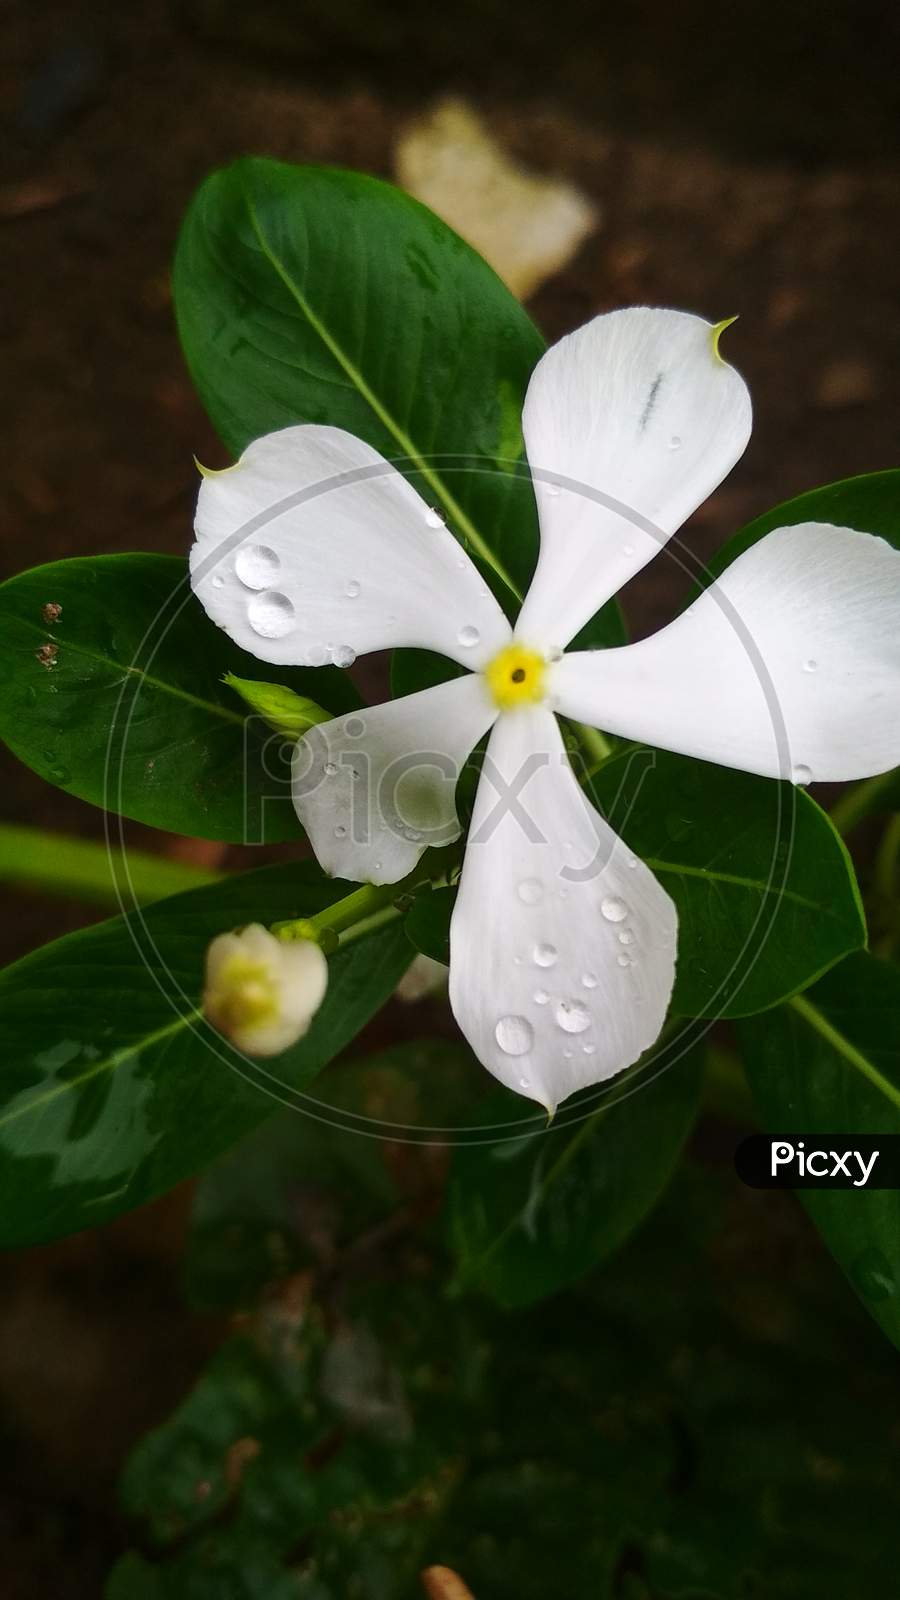 Rain Drops on Flowers and Leaves, The Flowers are Nayantara (Rose Periwinkle), Colours of white, Homemade Flowers